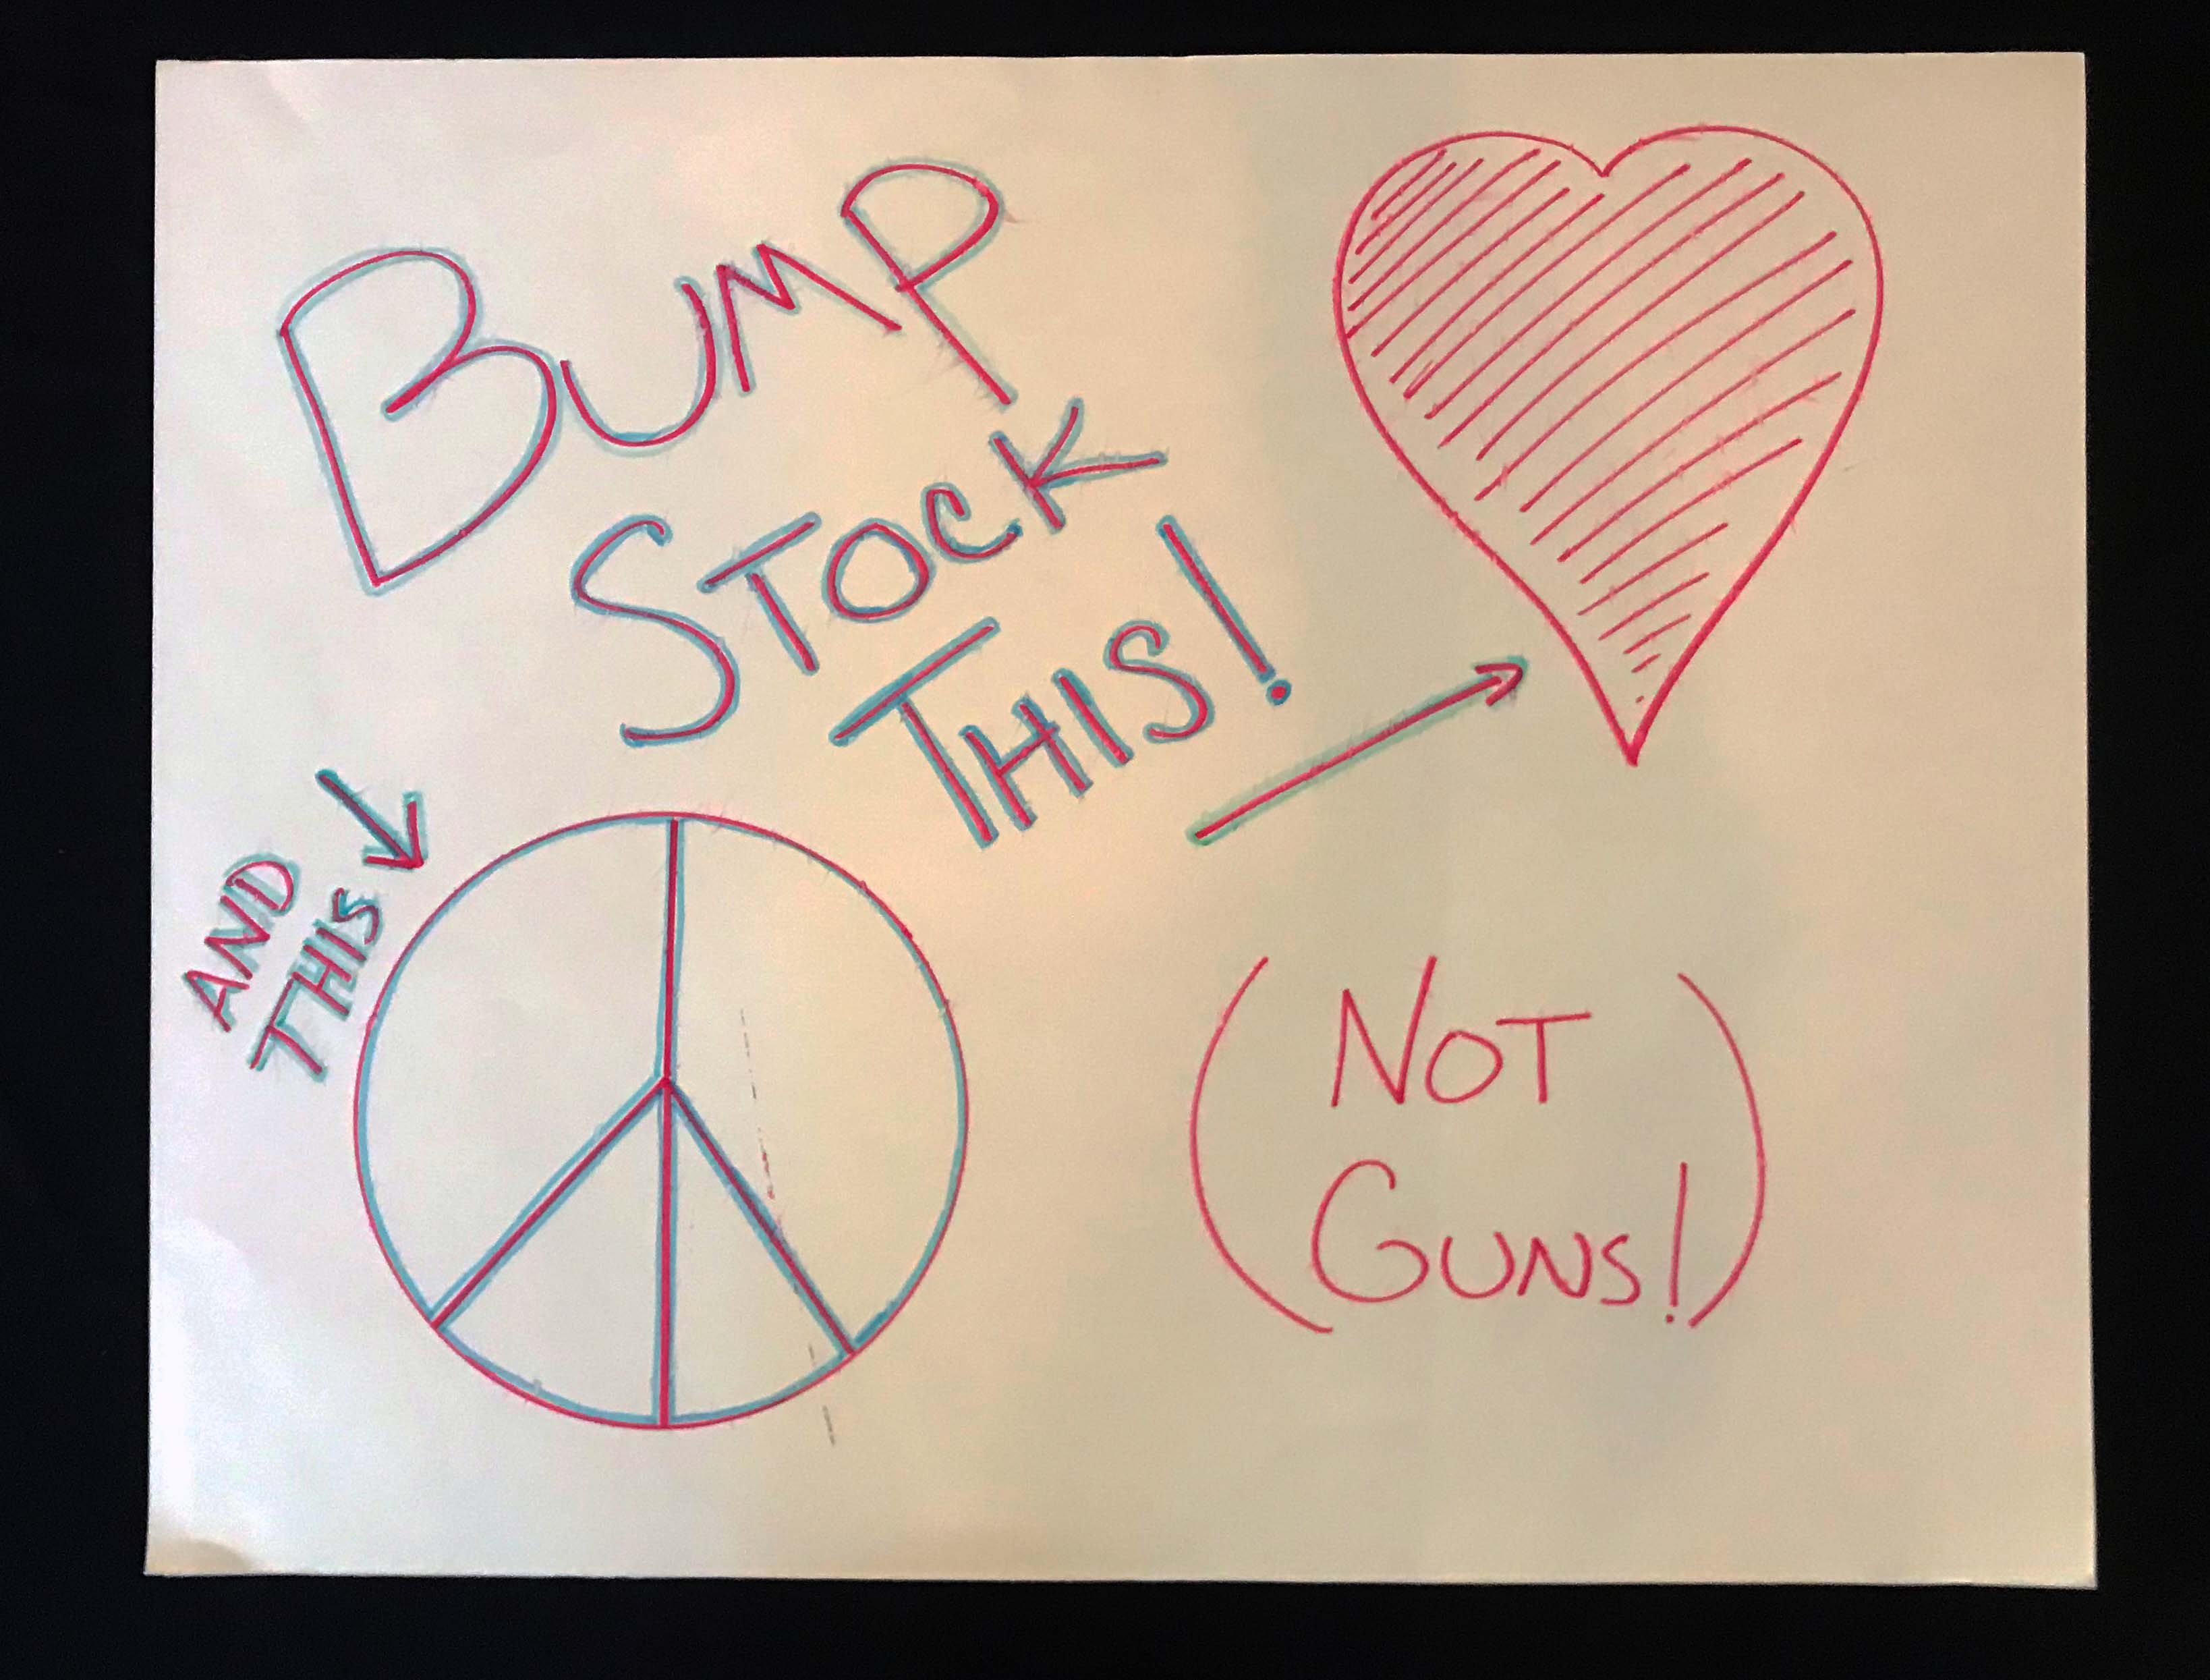 Charlotte March for Our Lives, 2018. Sign reads: "Bump stock this [peace sign] and this [heart]! Not guns!"